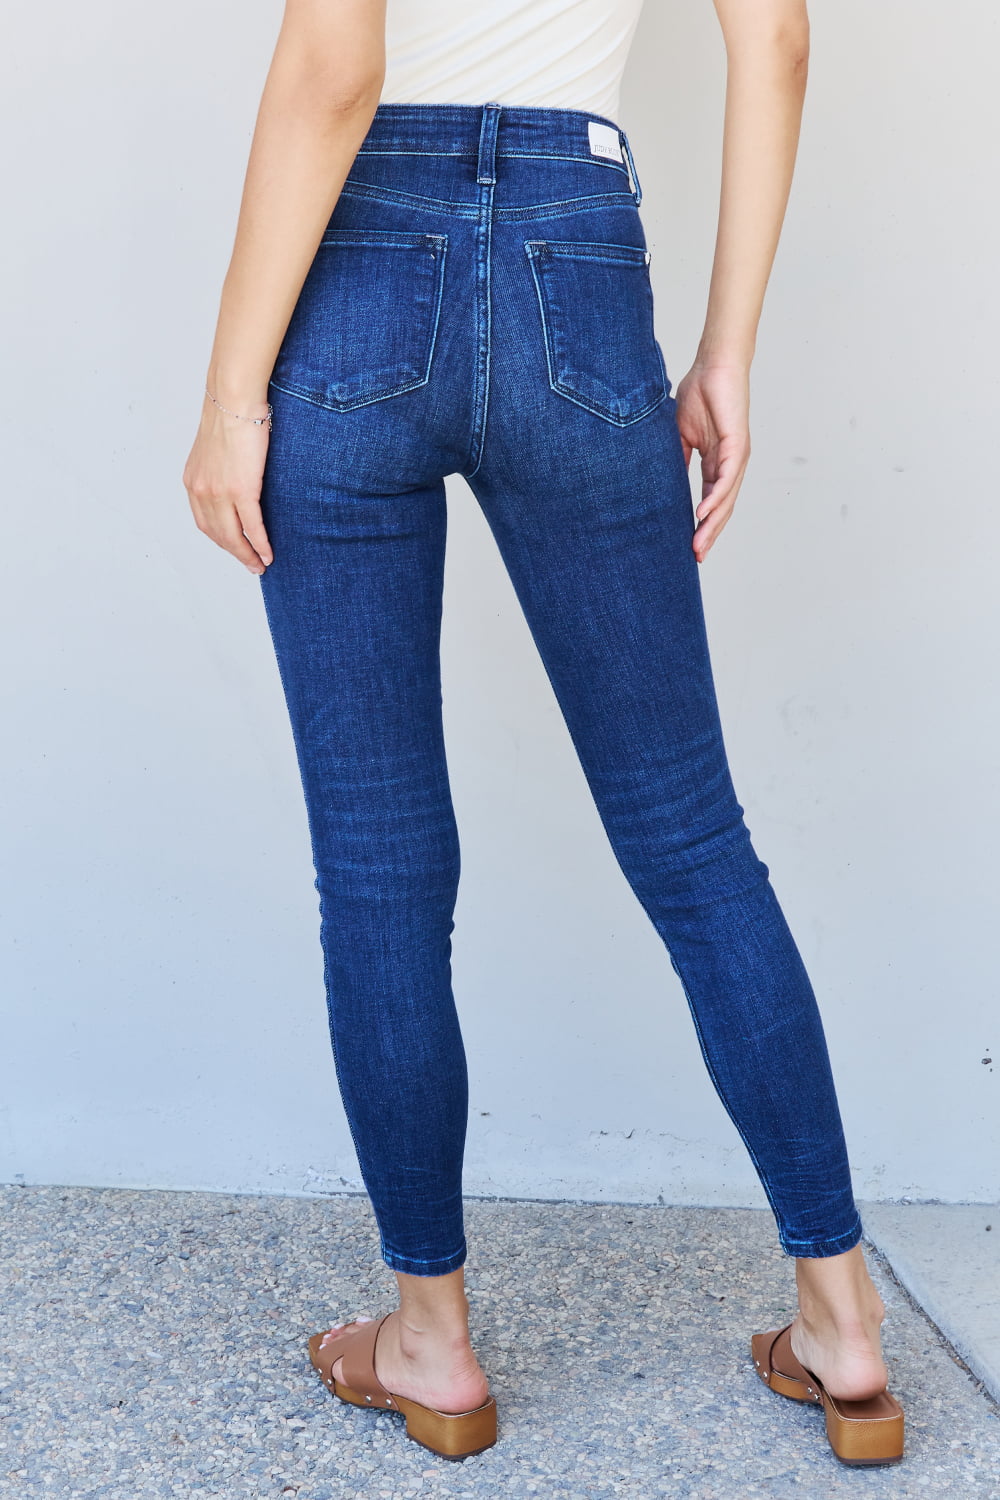 Judy Blue Marcielle Mid Rise Crinkle Ankle Skinny Jeans Pants RYSE Clothing Co.   